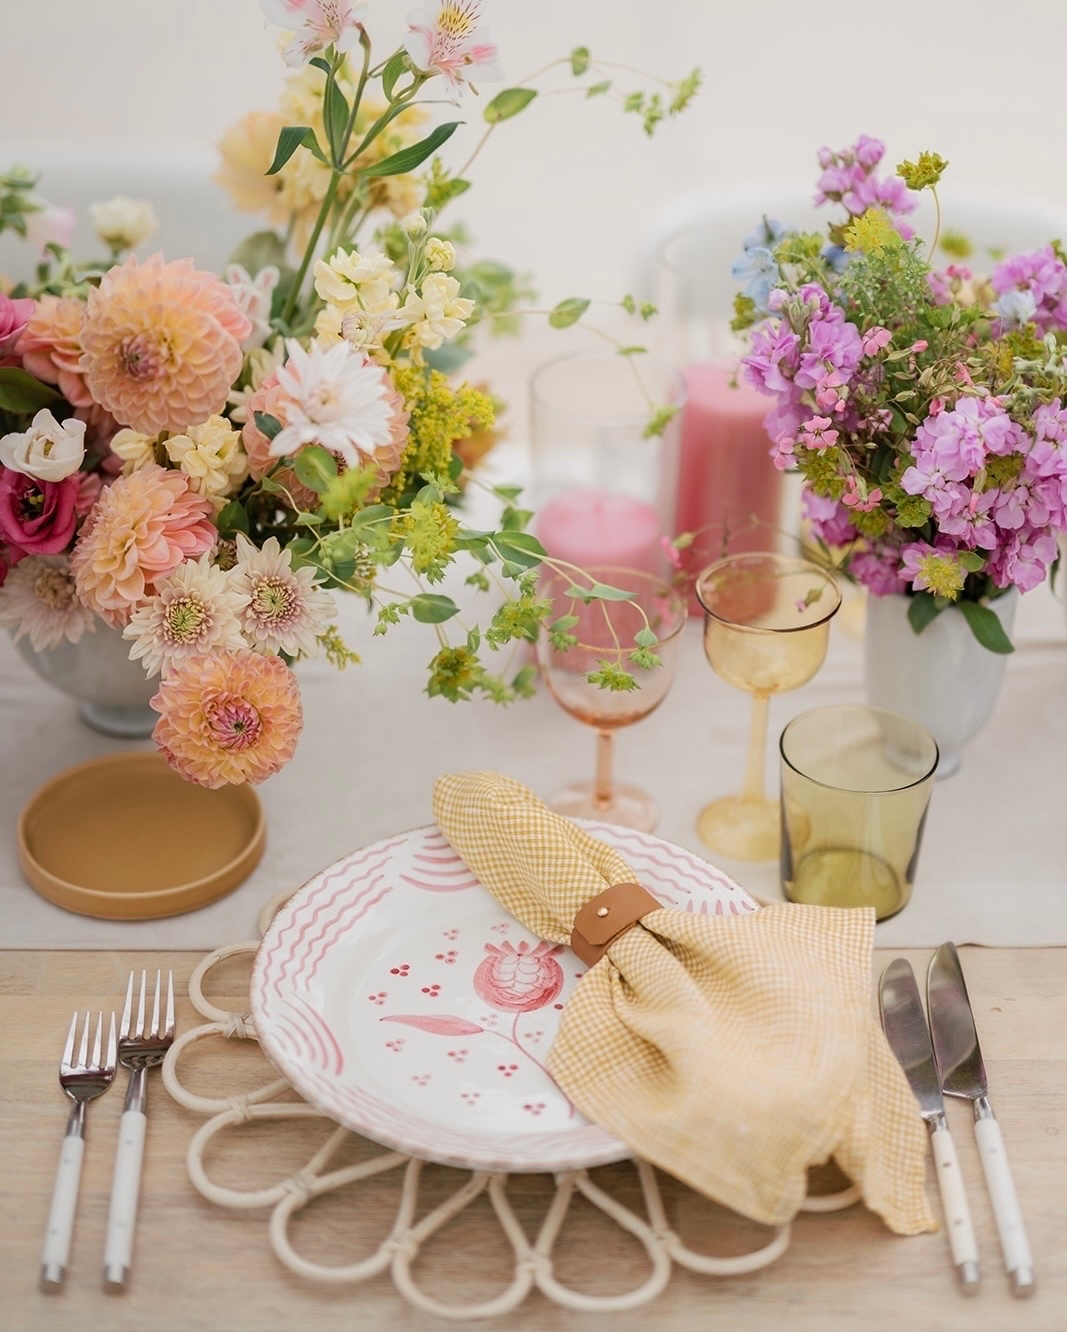 55 Bold Summer Wedding Tables We’re Loving At The Moment ⋆ Ruffled